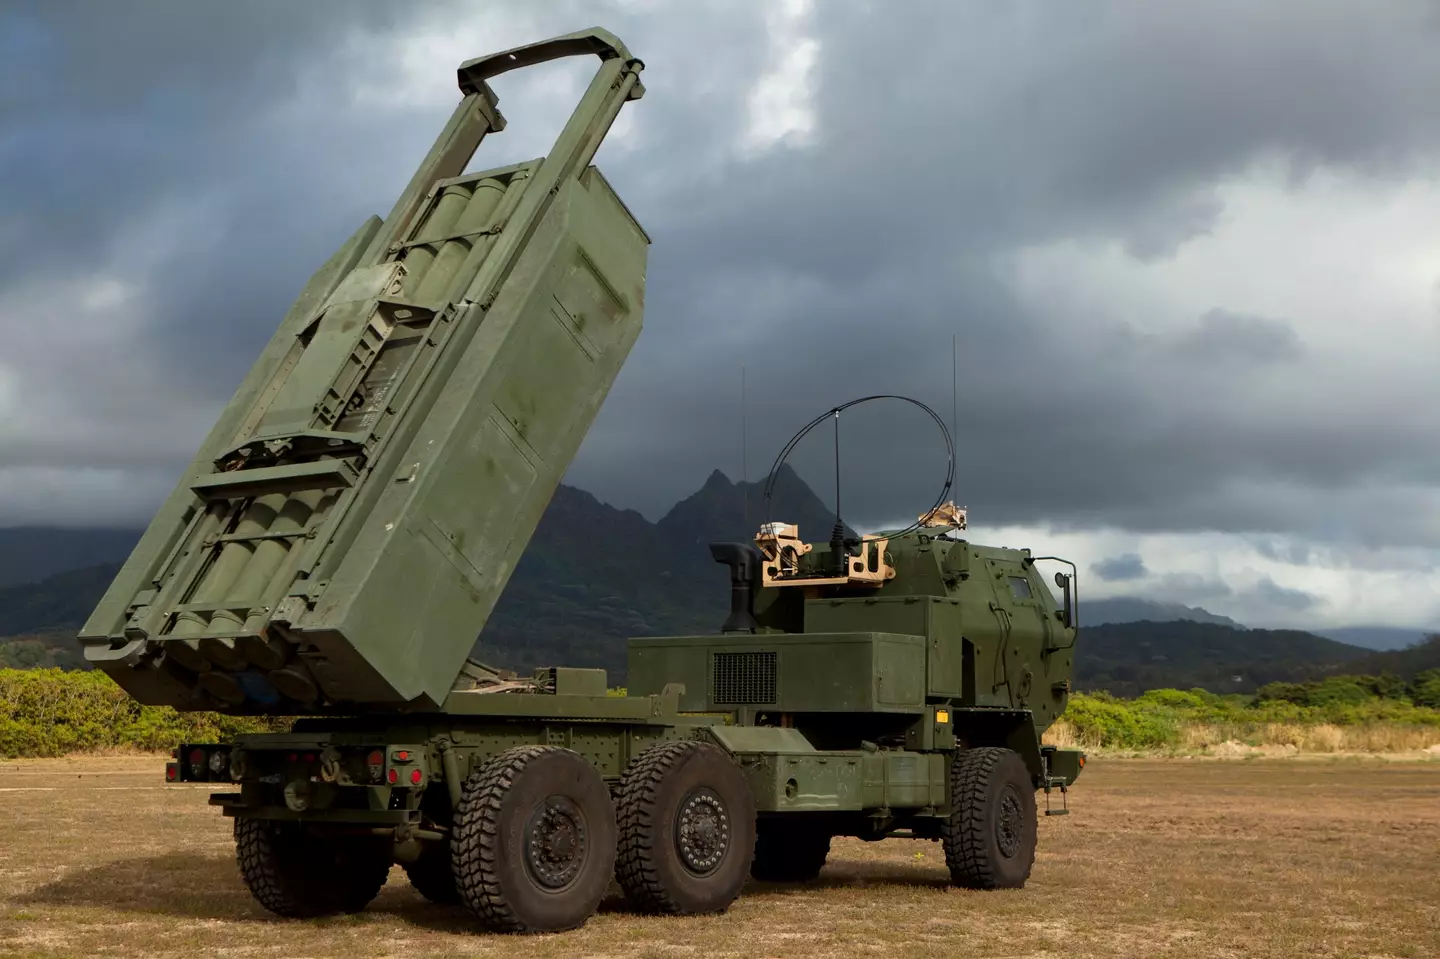 The US have confirmed they will supply HIMARS rockets to Ukraine.